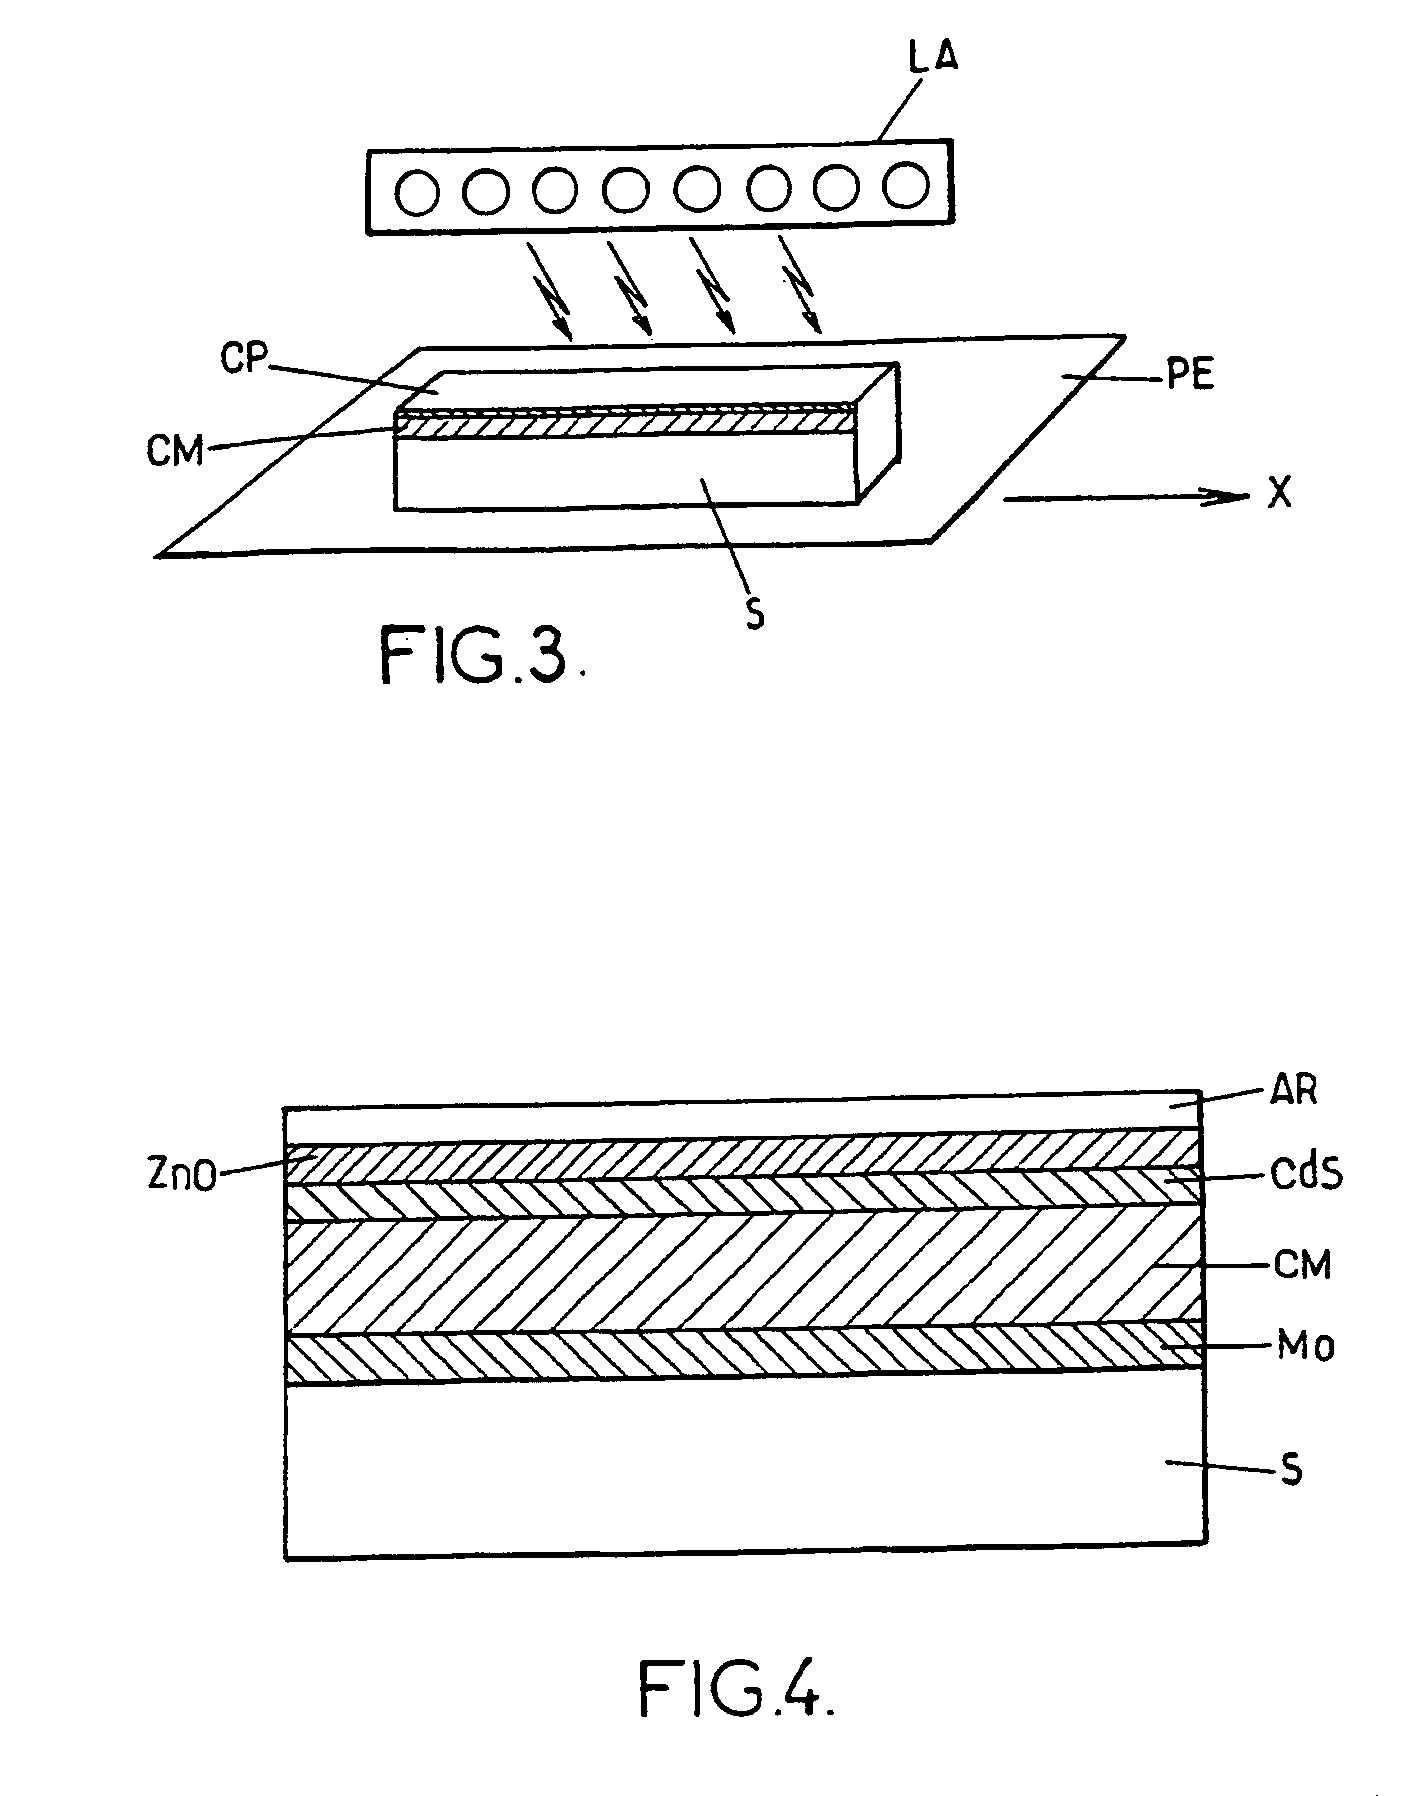 Method for making thin-film semiconductors based on I-III-VI2 compounds, for photovoltaic applications